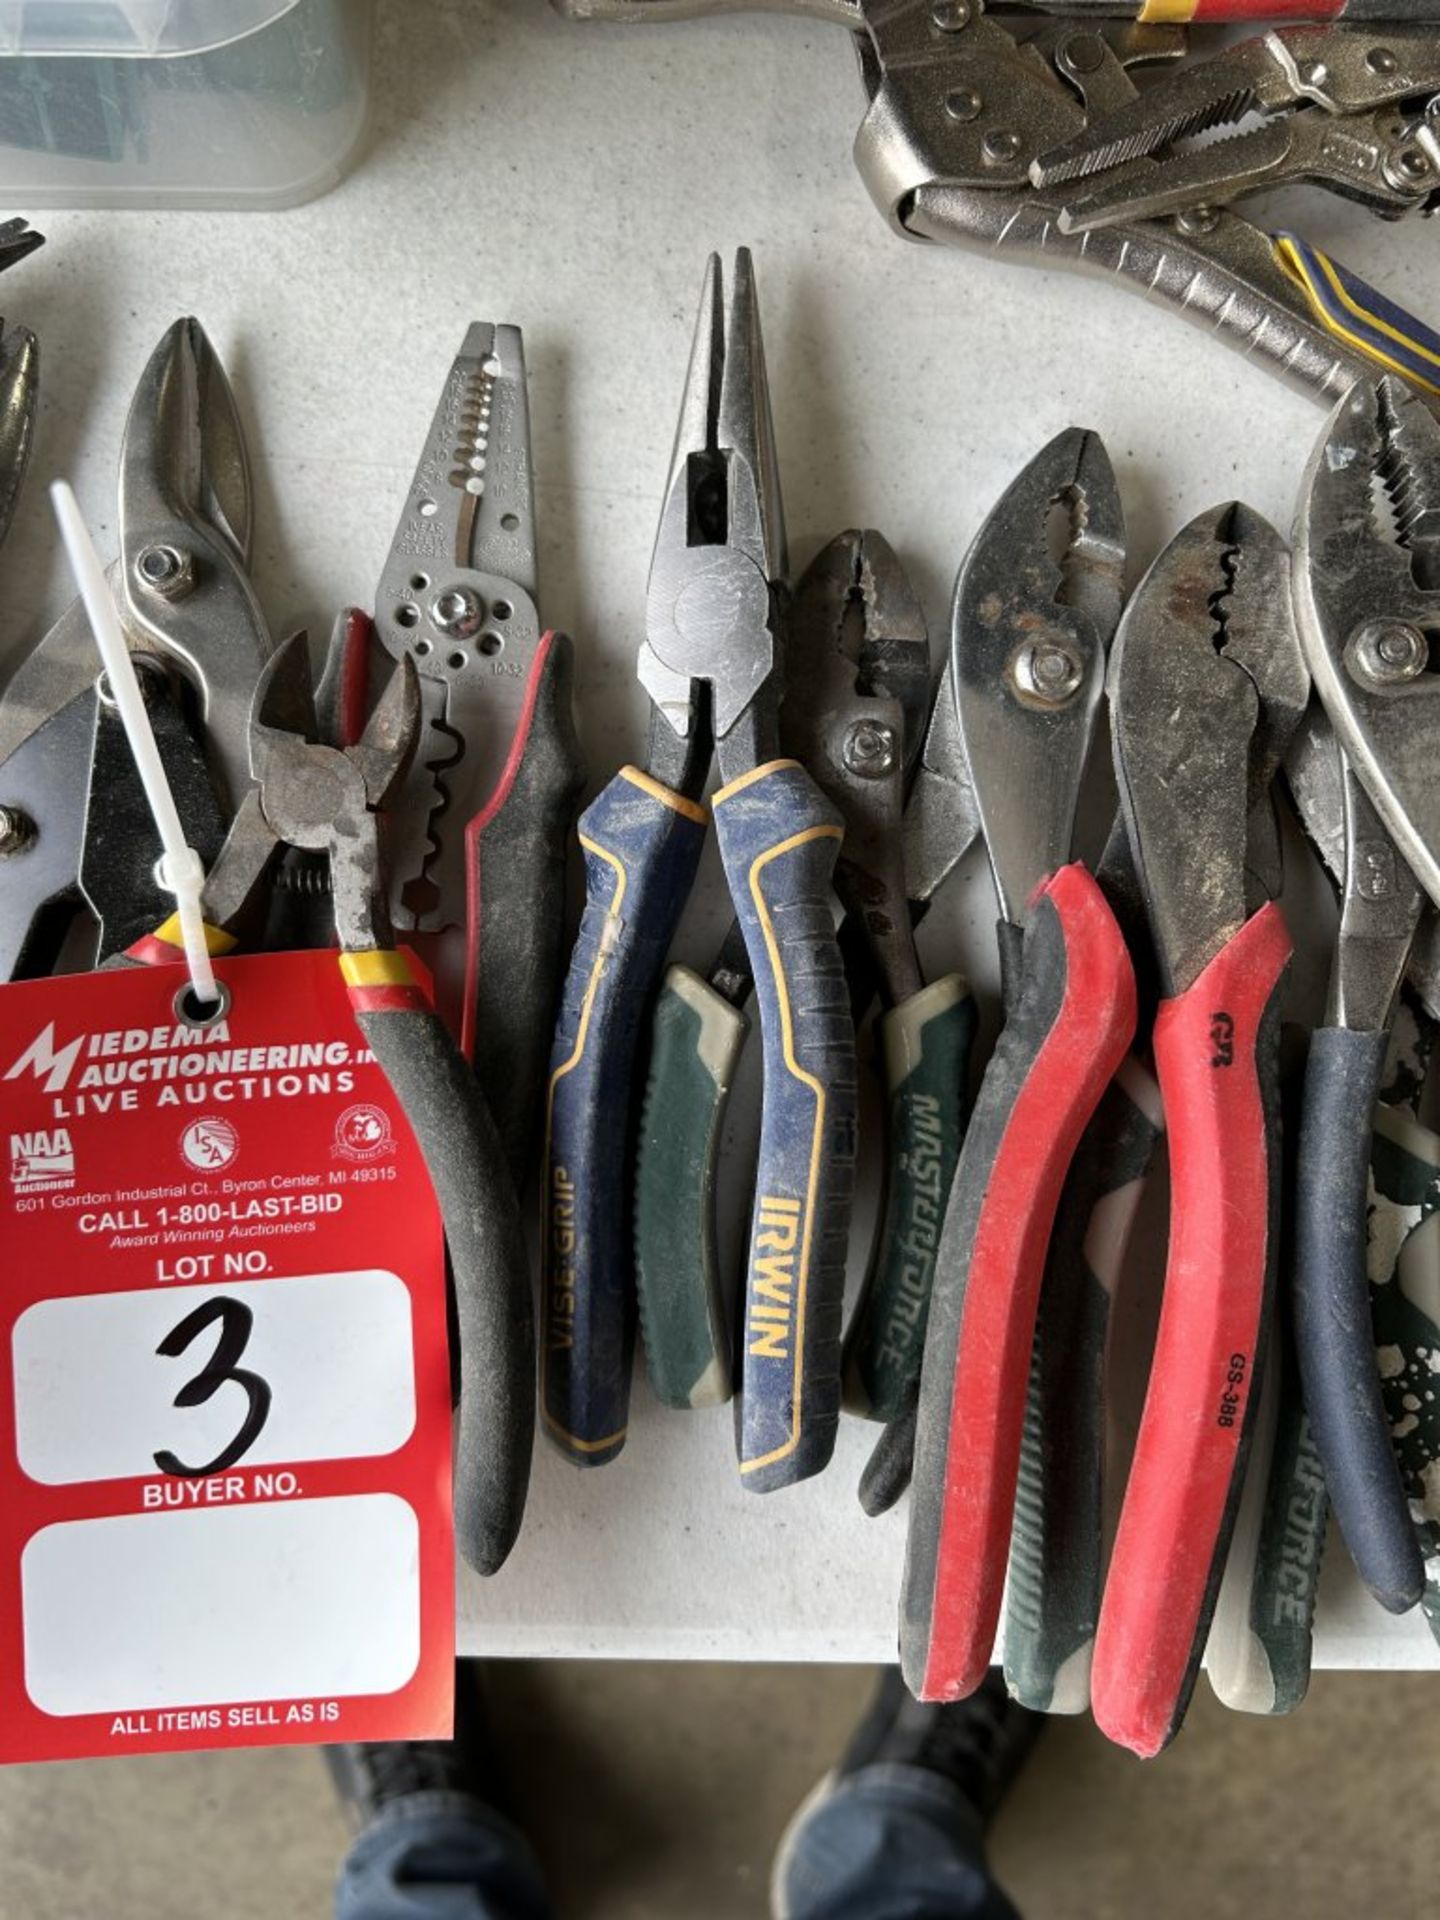 ASSORTED TOOLS INCLUDING PLIERS, TIN SNIPS, SCREWDRIVERS, RAZOR-BLADES, ETC. - Image 3 of 7